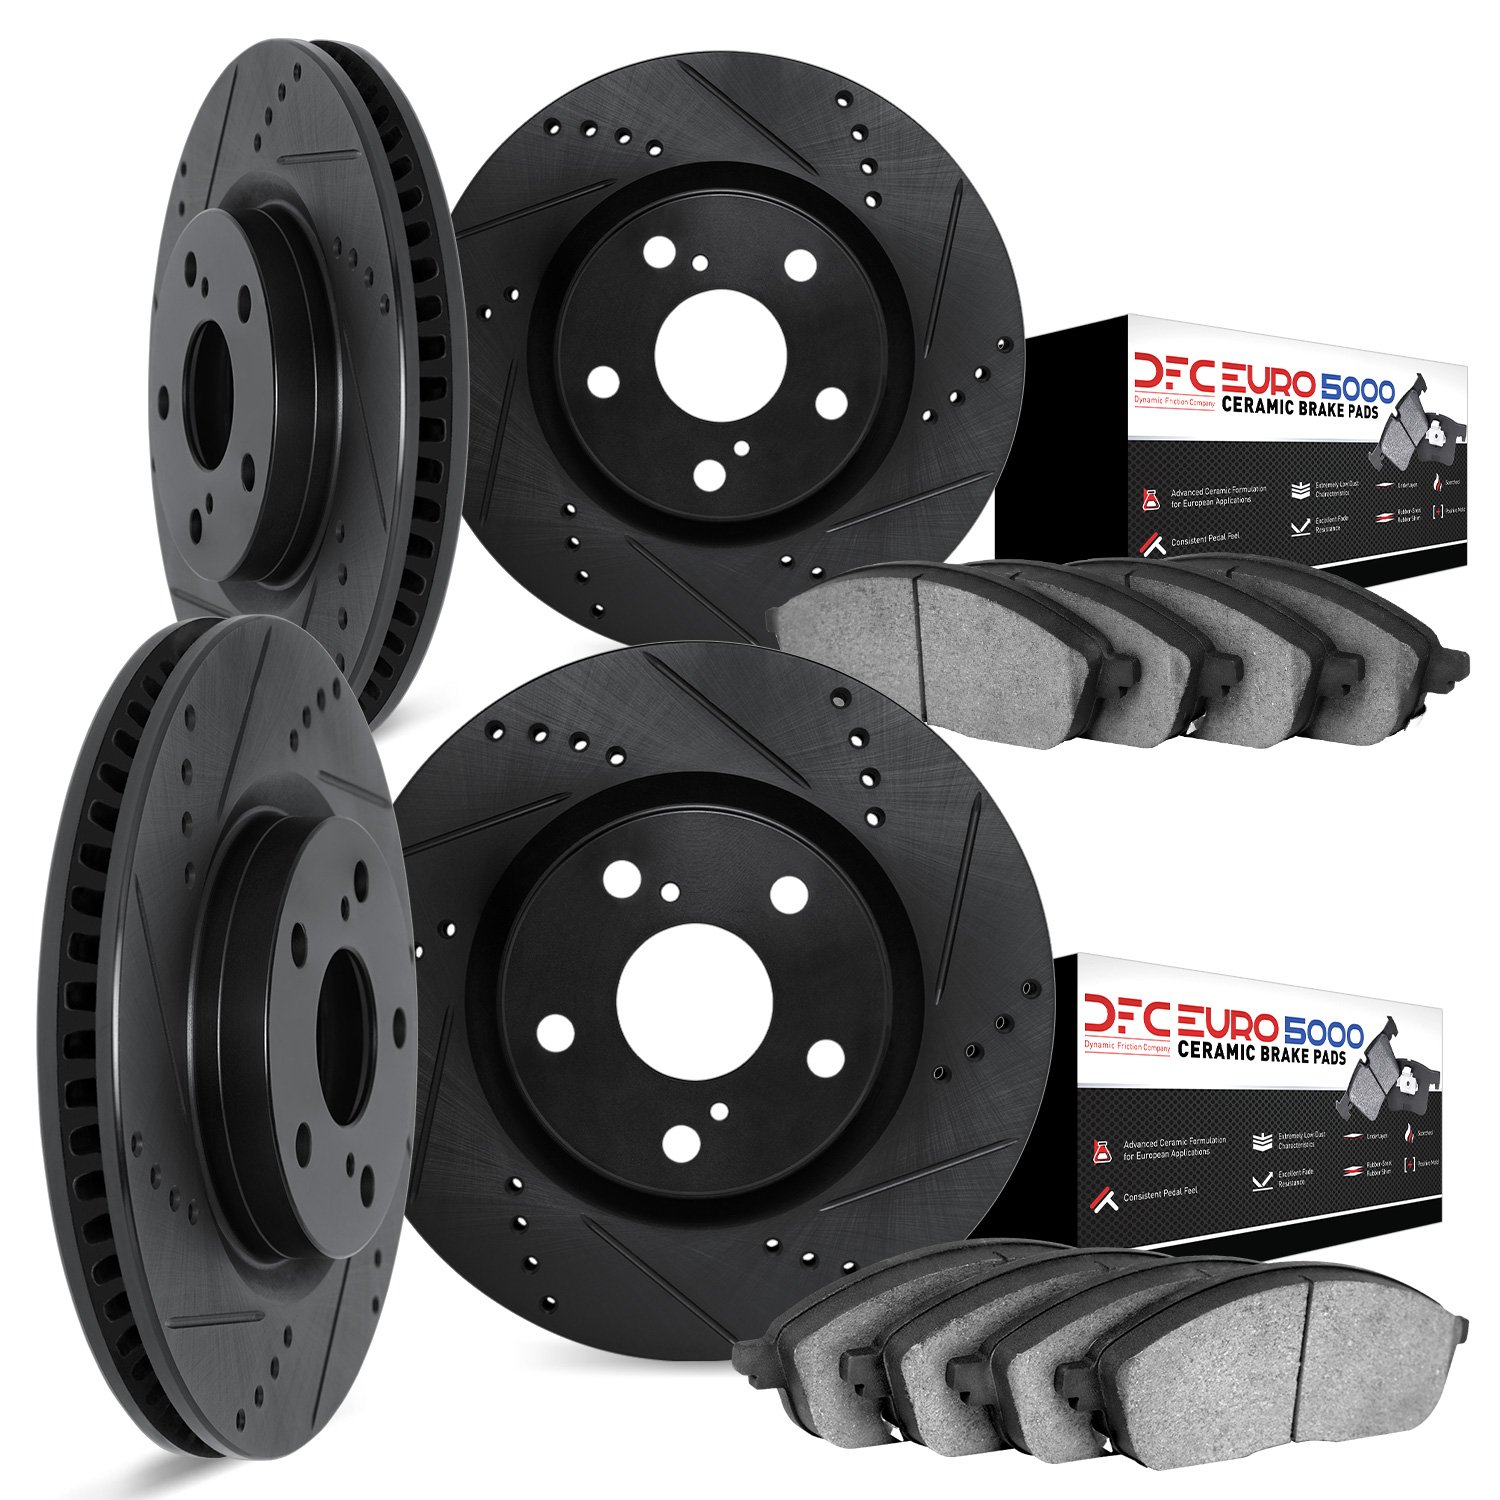 8604-31030 Drilled/Slotted Brake Rotors w/5000 Euro Ceramic Brake Pads Kit [Black], 2012-2016 BMW, Position: Front and Rear